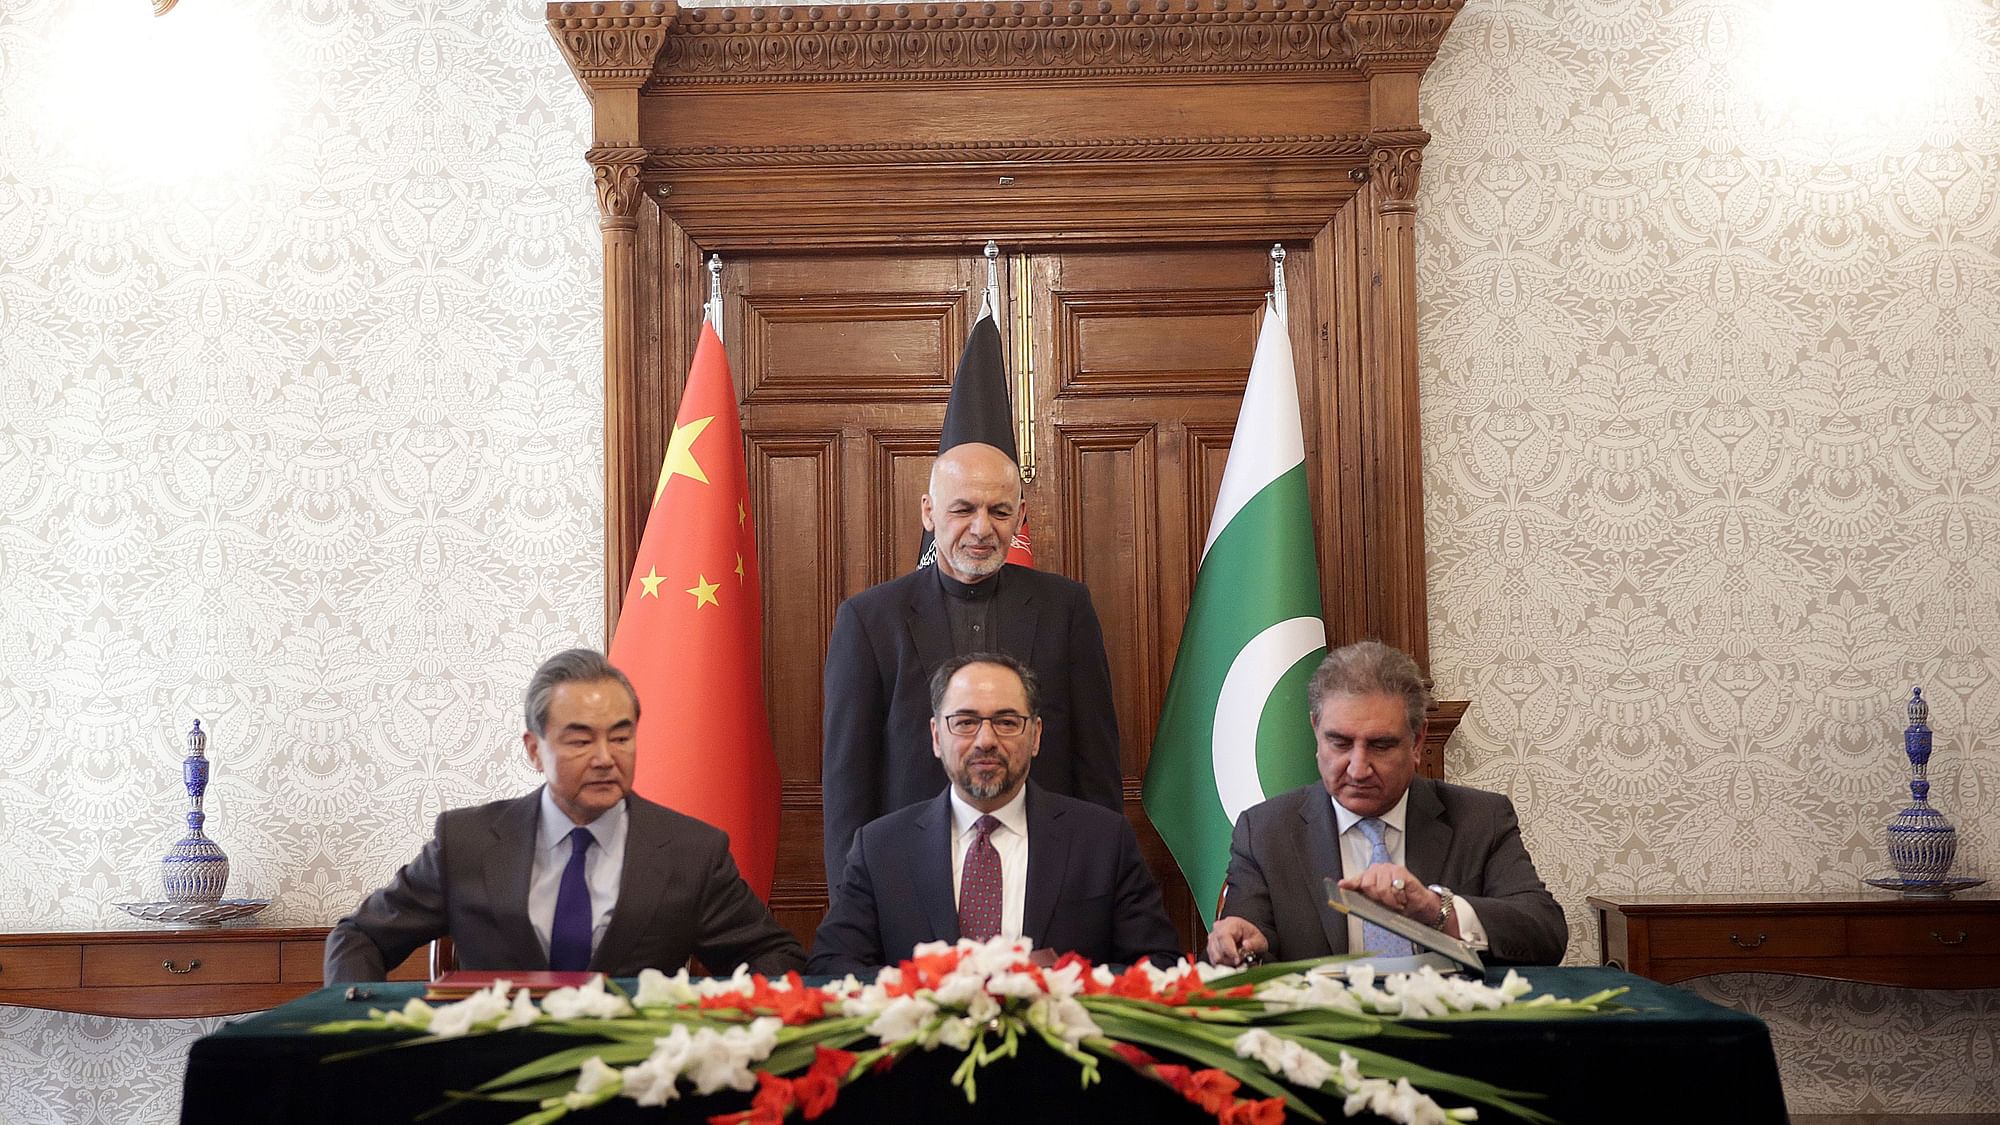 Afghanistan’s President Ashraf Ghani, standing, watches as Afghanistan’s Minister of Foreign Affairs Salahuddin Rabbani, center, Pakistan’s Foreign Minister Shah Mehmood Qureshi, right, and Chinese Foreign Minister Wang Yi, left, sign the agreement during the meeting.